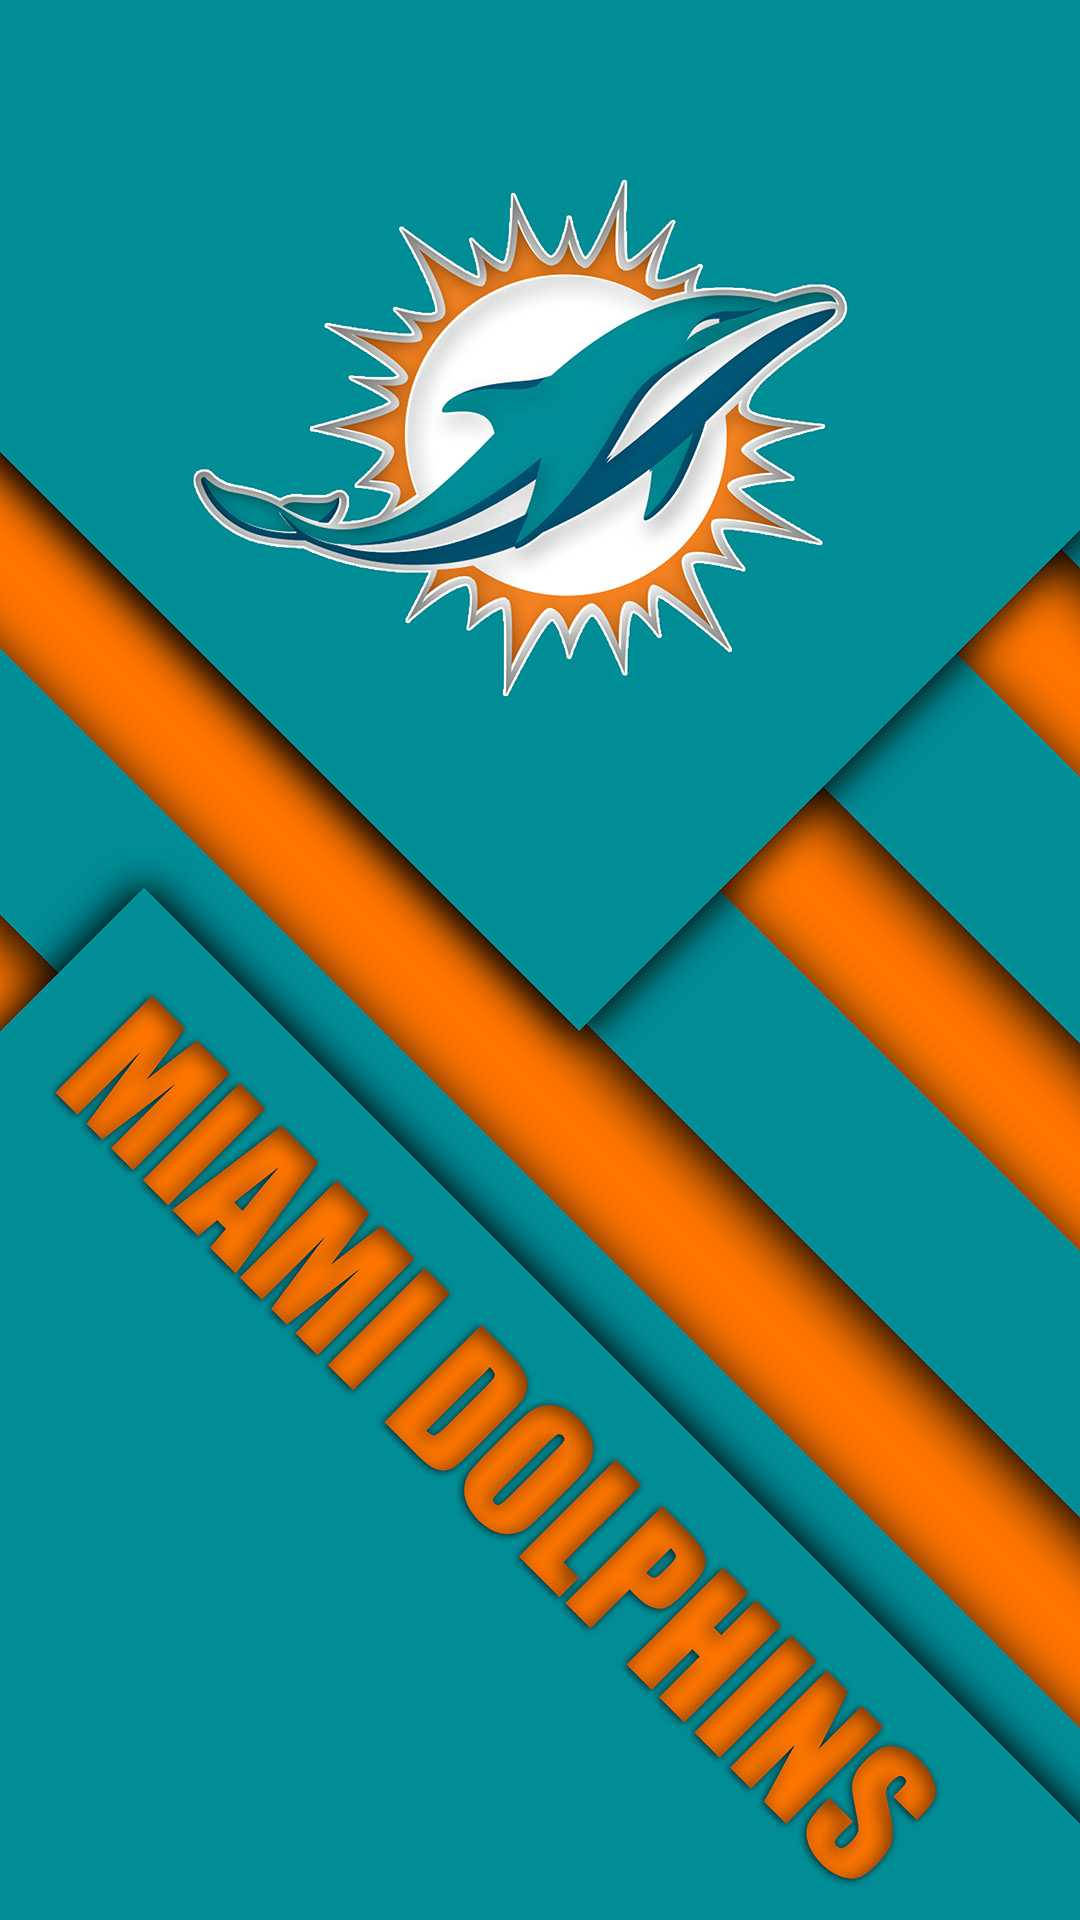 Cheer on the Miami Dolphins with Your Own iPhone Wallpaper